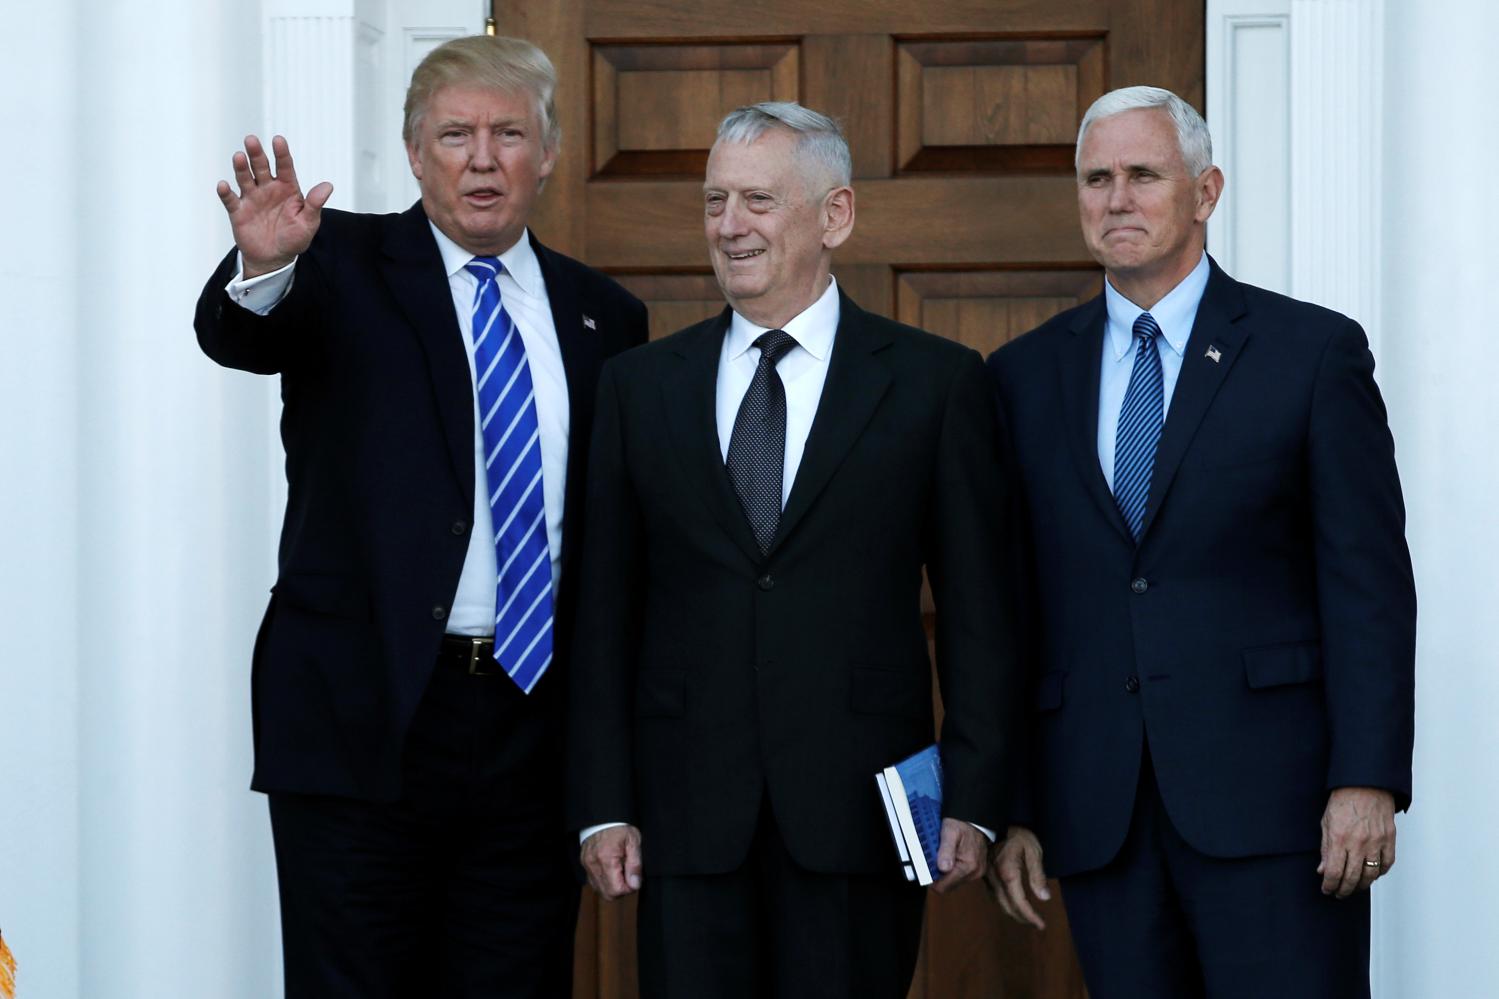 U.S. President-elect Donald Trump (L) and Vice President-elect Mike Pence (R) greet retired Marine General James Mattis for a meeting at the main clubhouse at Trump National Golf Club in Bedminster, New Jersey, U.S., November 19, 2016. REUTERS/Mike Segar - RTSSFDG